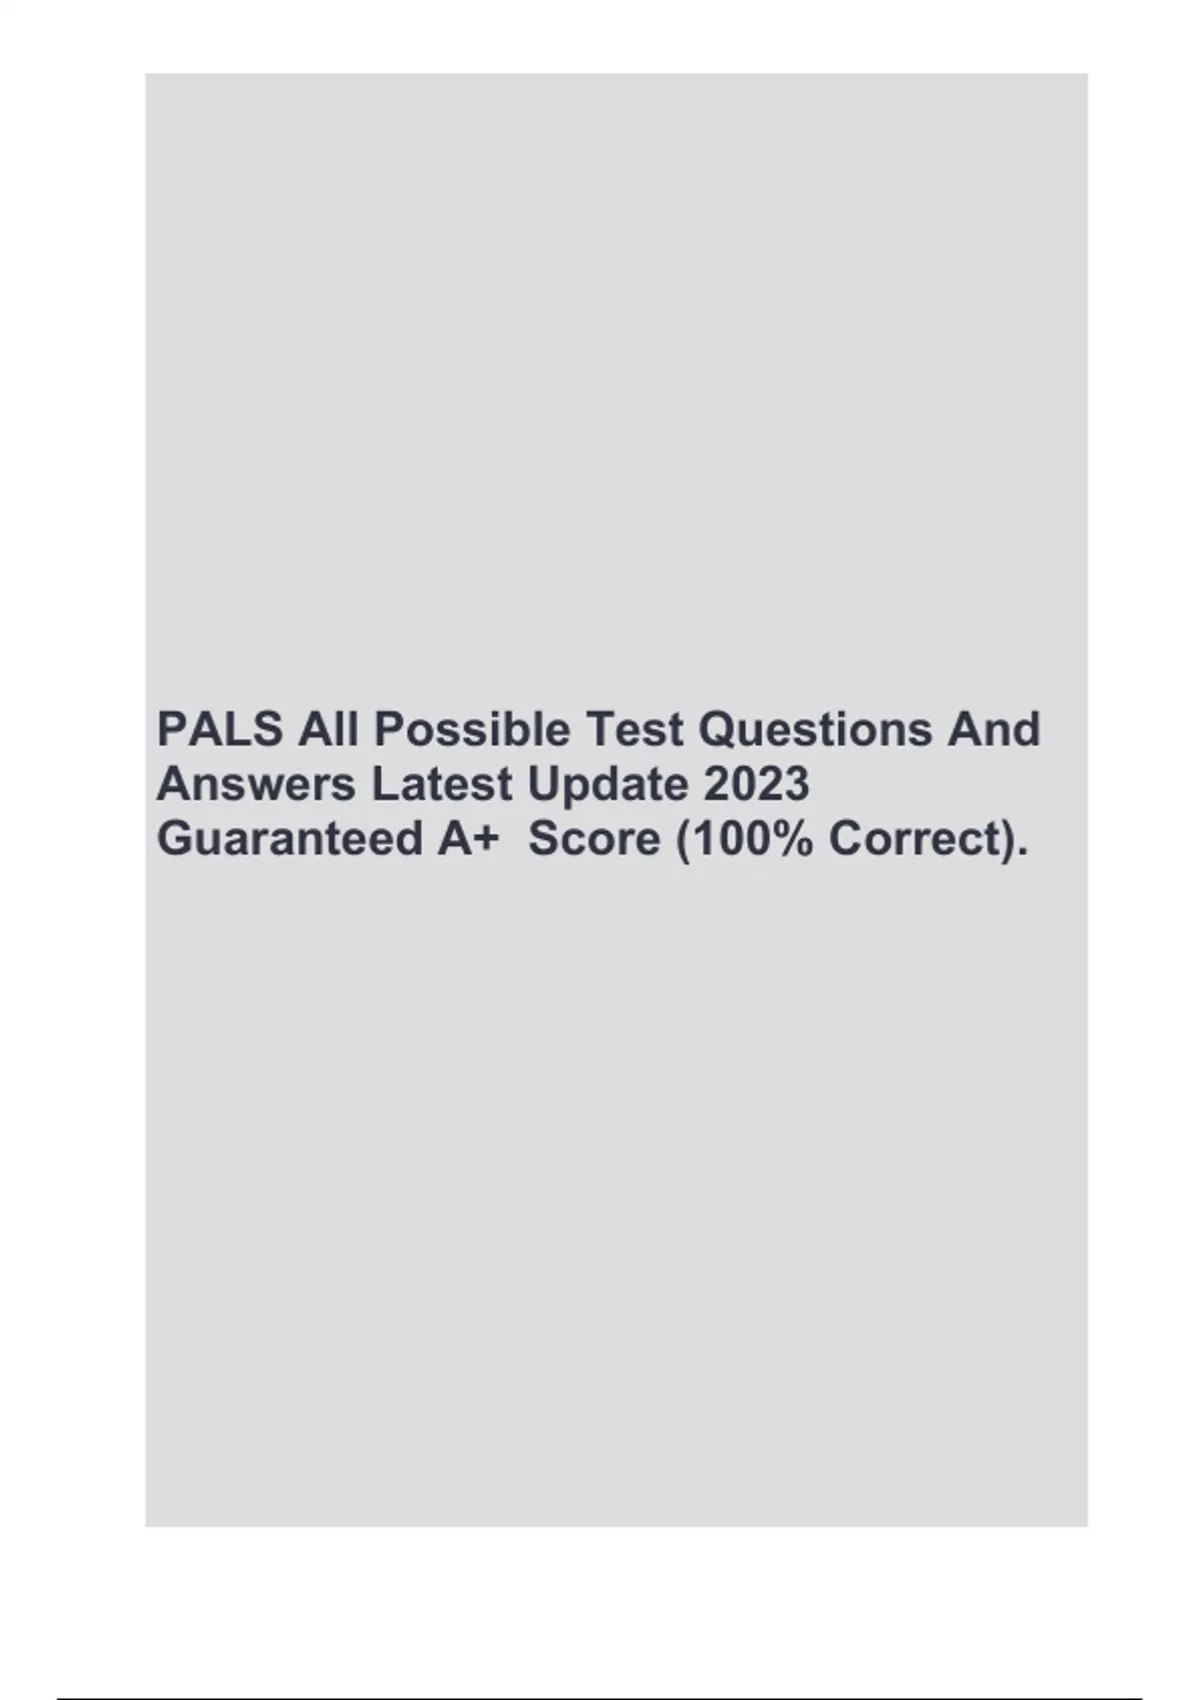 PALS All Possible Test Questions And Answers Latest Update 2023